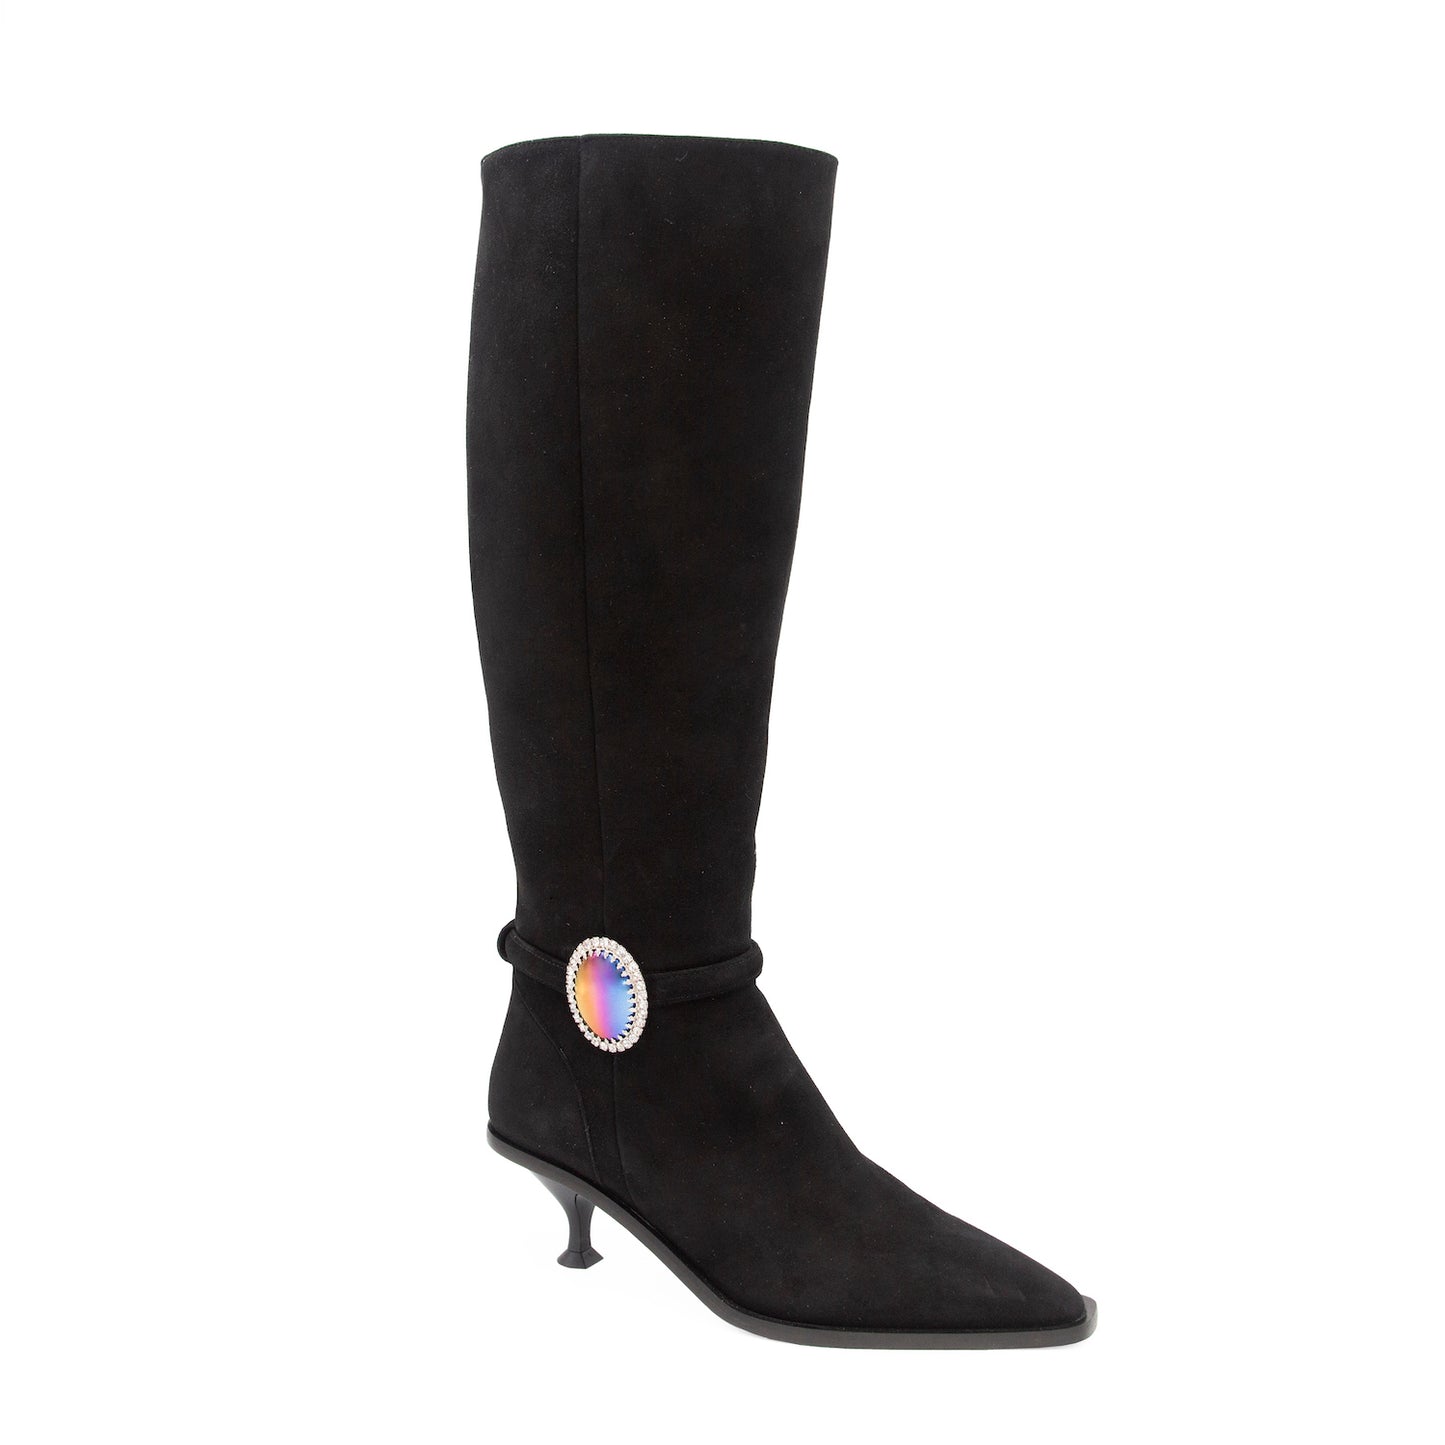 Diana Tall Boot Black Cashmere